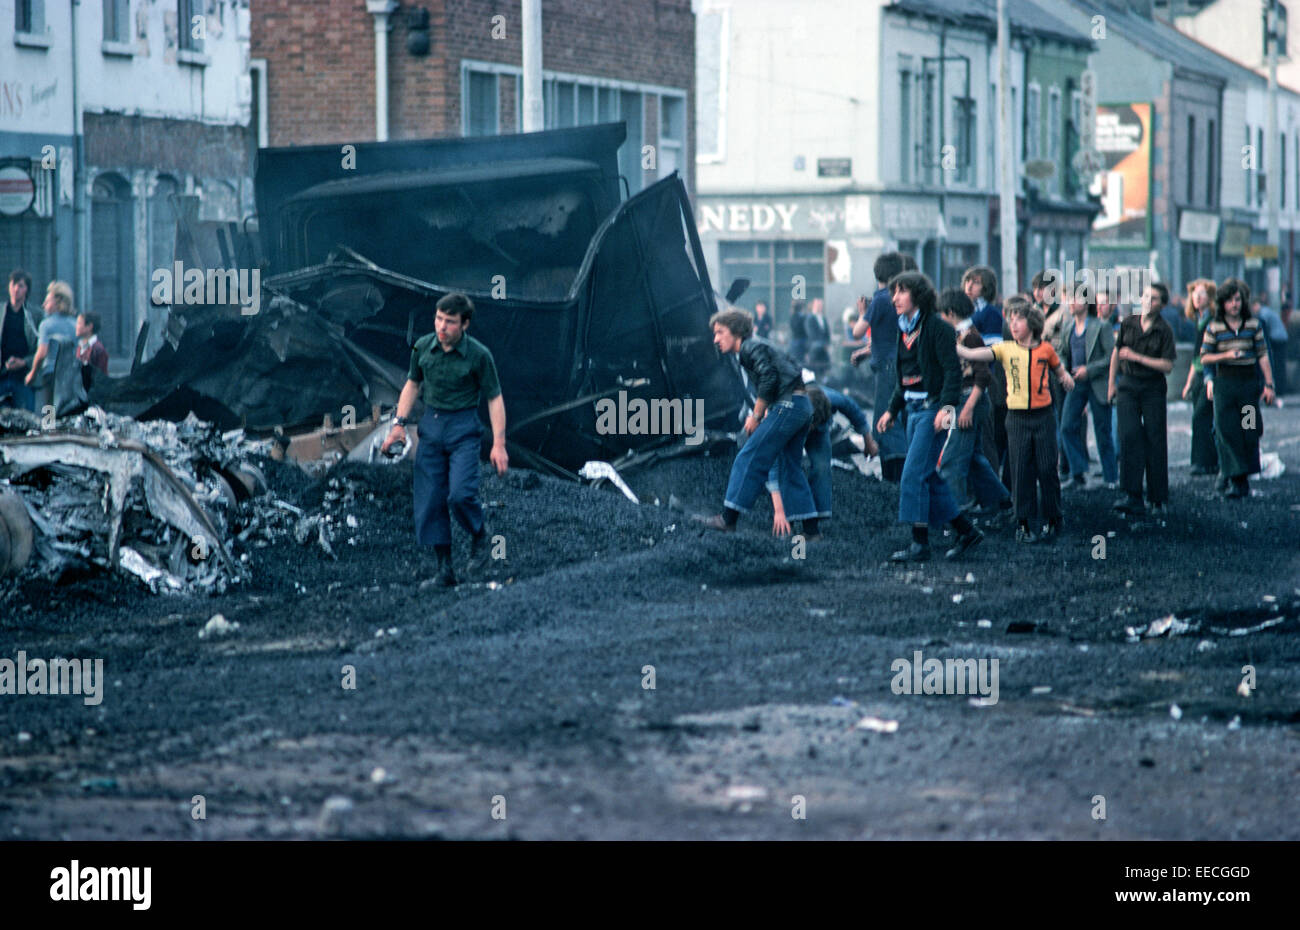 BELFAST, NORTHERN IRELAND - AUGUST 1976, Nationalist Youths throwing stones at the British Army during Riots in the Falls Road, West Belfast during The Troubles, Northern Ireland. Stock Photo